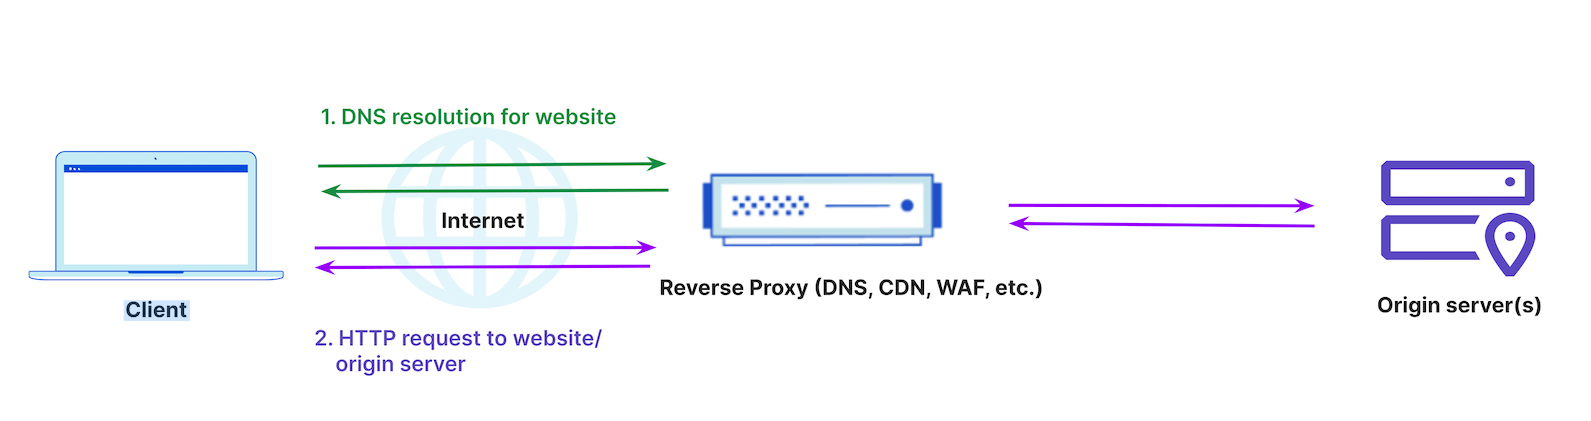 Cloudflare provides reverse proxy functionality between clients and origin servers, enabling greater user and application security.